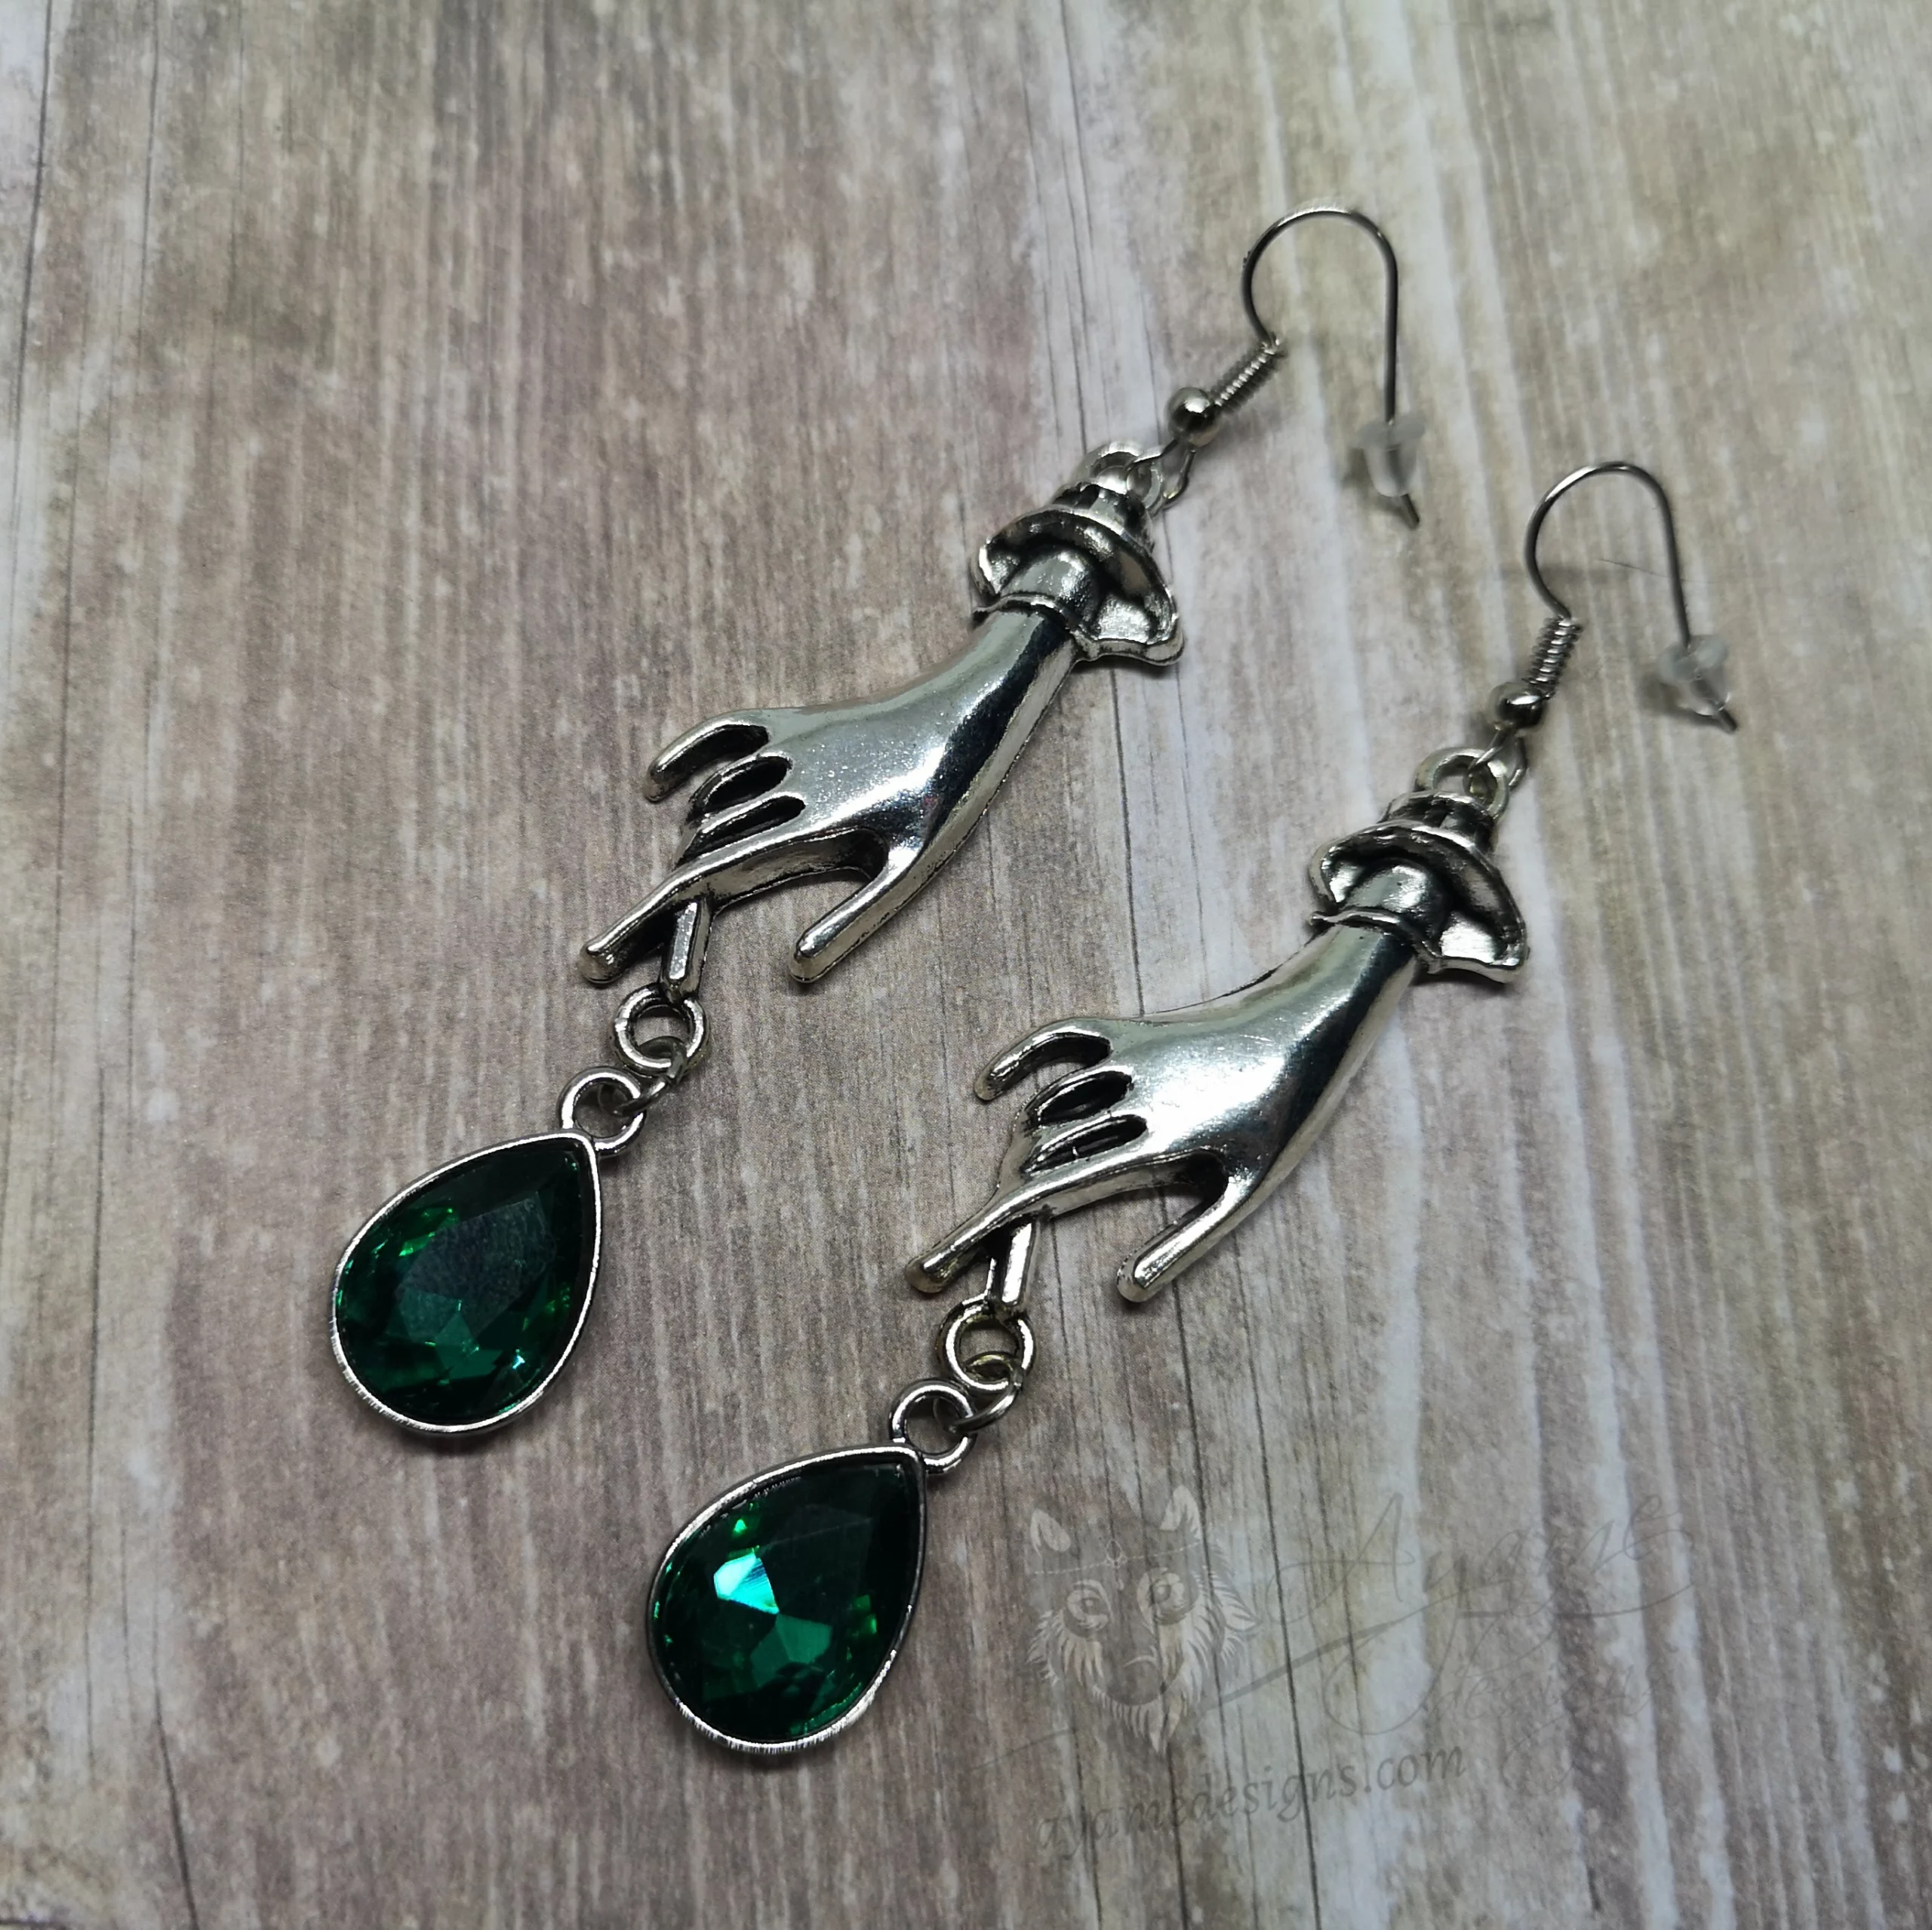 Elegant gothic earrings with hand charms and green teardrop charms, on stainless steel earring hooks